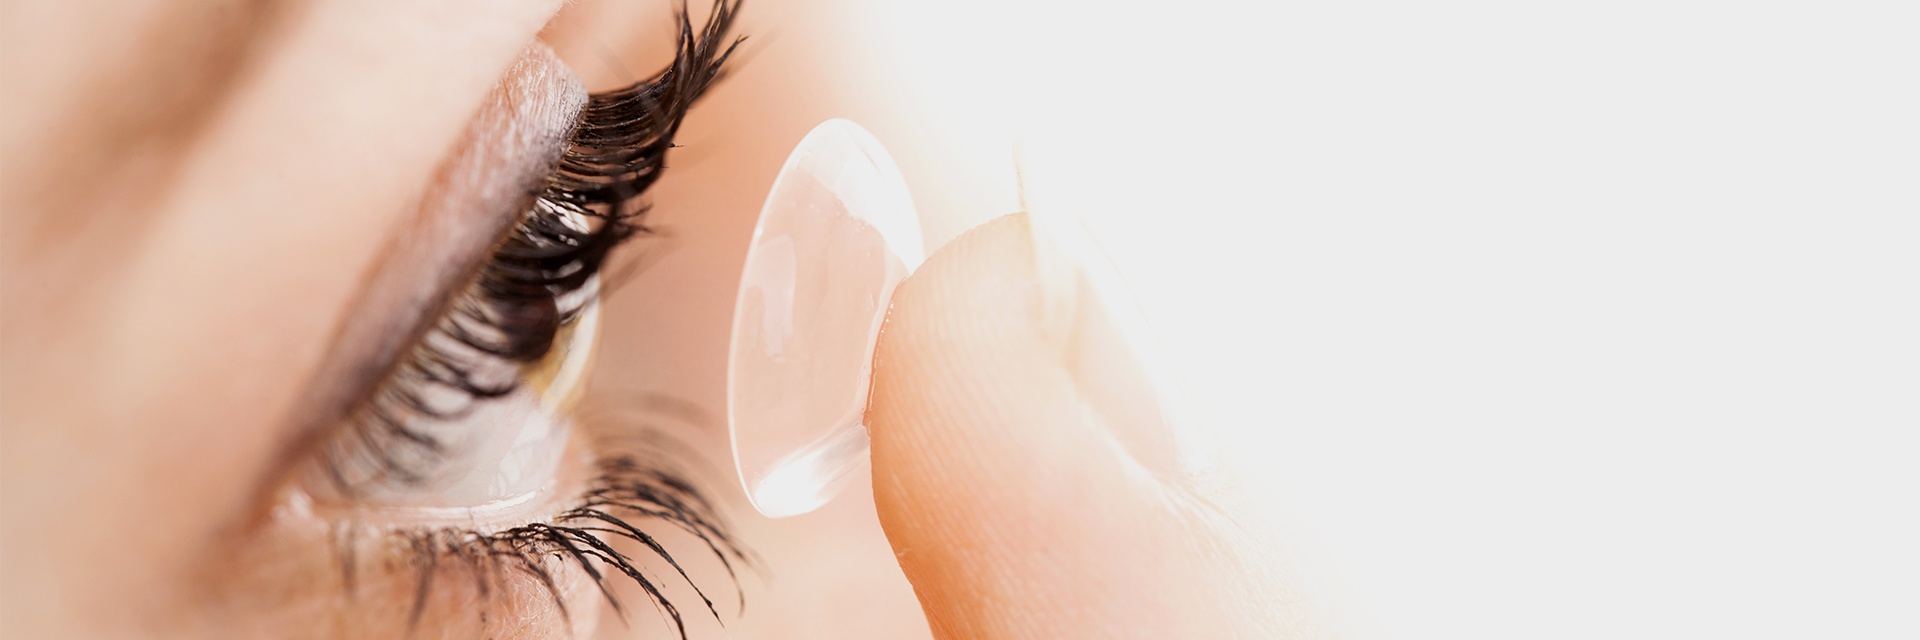 Contact Lenses Image 1